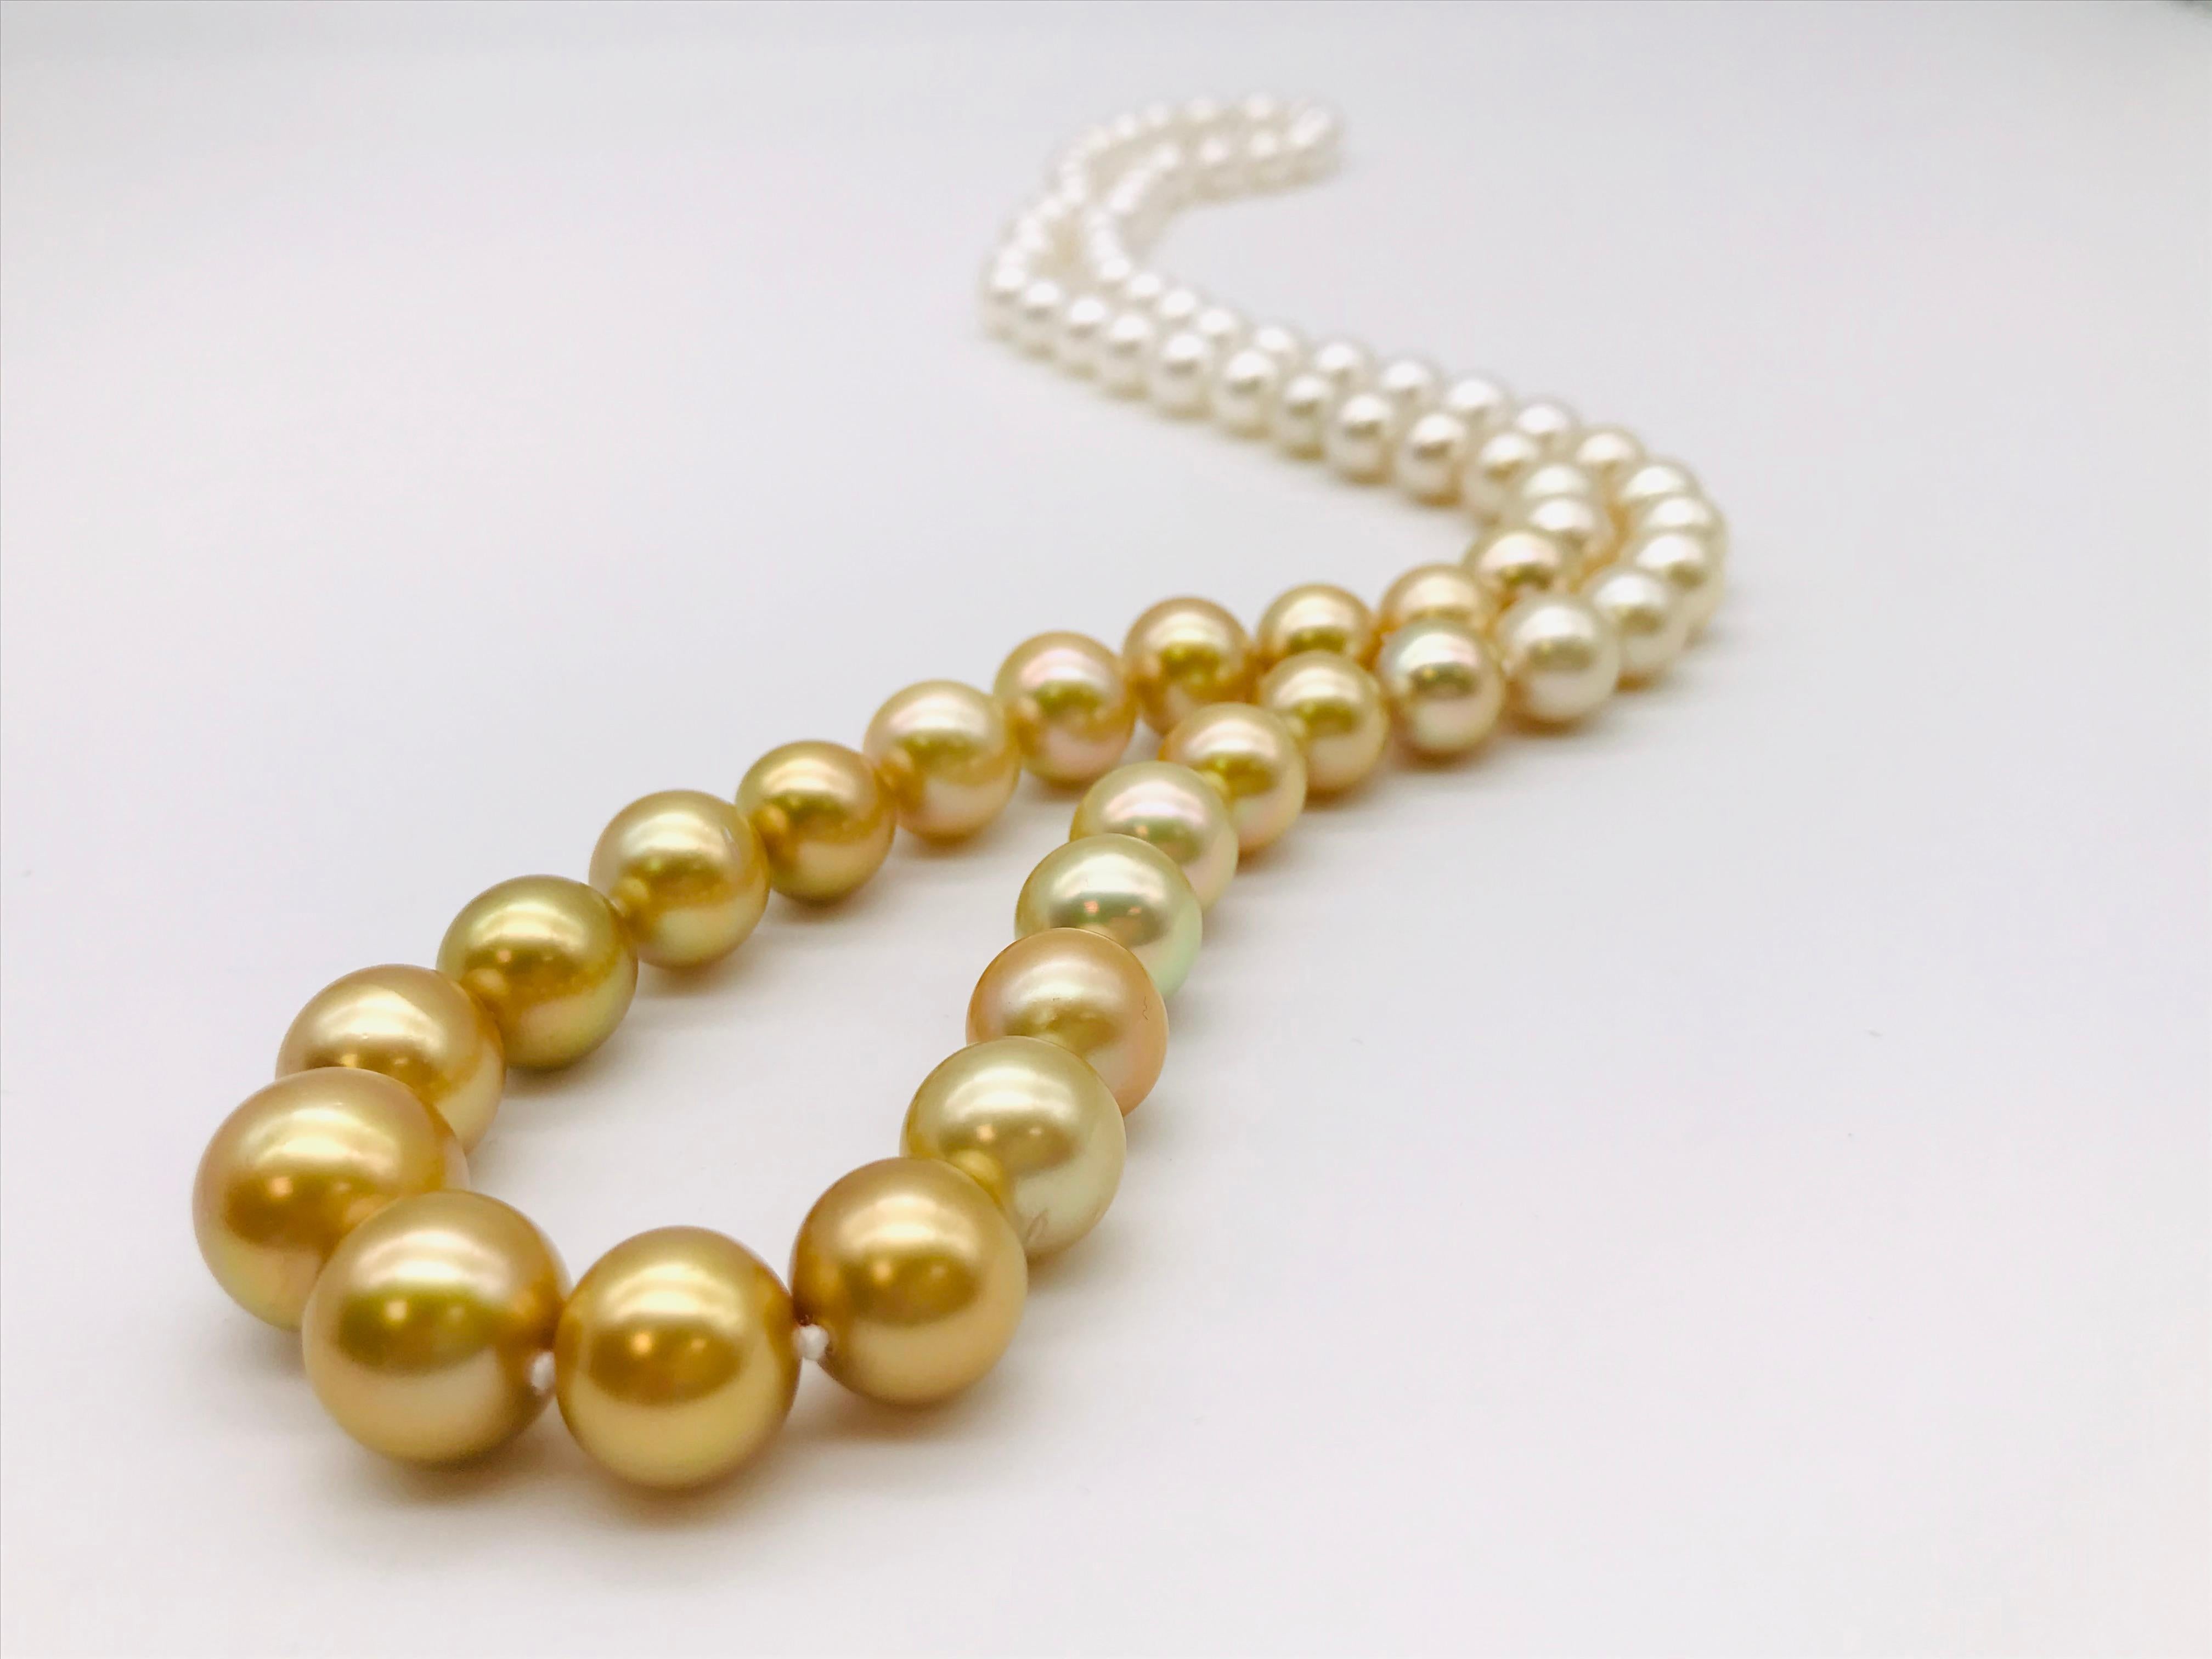 White Gold Gradient South Sea Long Pearl Necklace
73 pearls 15 mm / 10 mm 
South Sea Pearls White and Gold Gradient 
Length 85 cm 
Exceptional quality